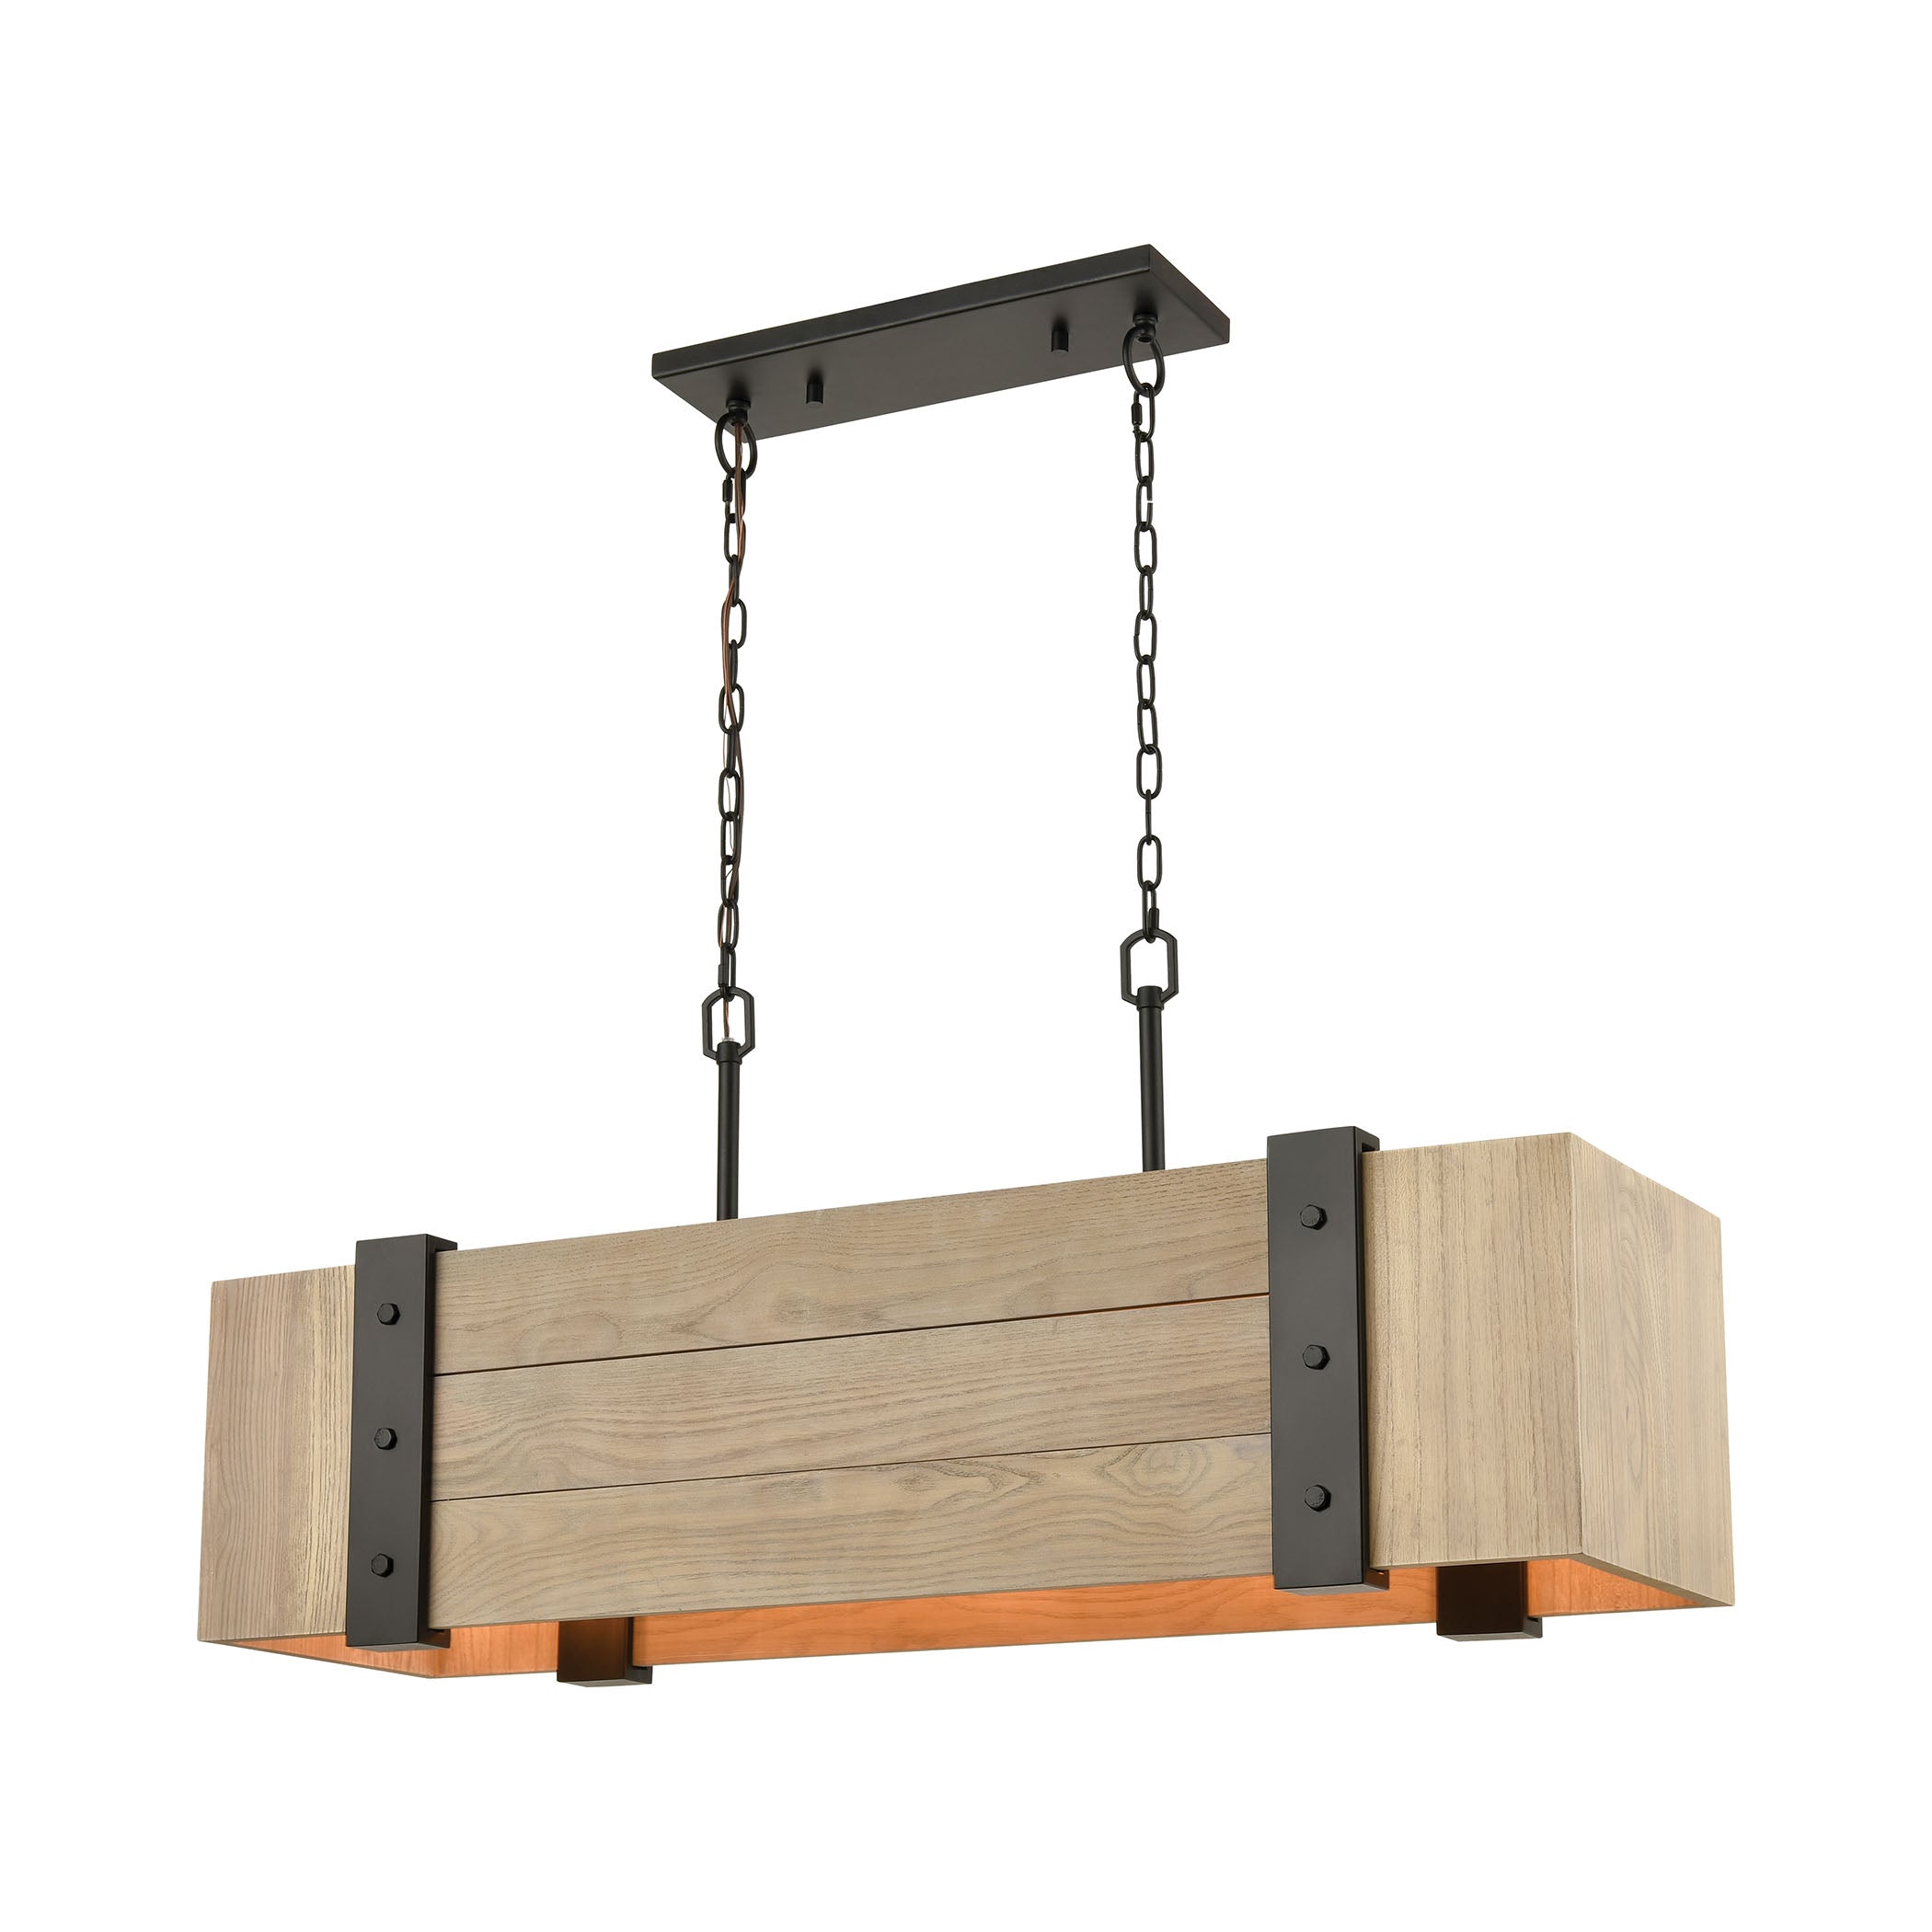 ELK Lighting 33386/5 Wooden Crate 5-Light Island Light in Oil Rubbed Bronze with Slatted Wood Shade in Natural